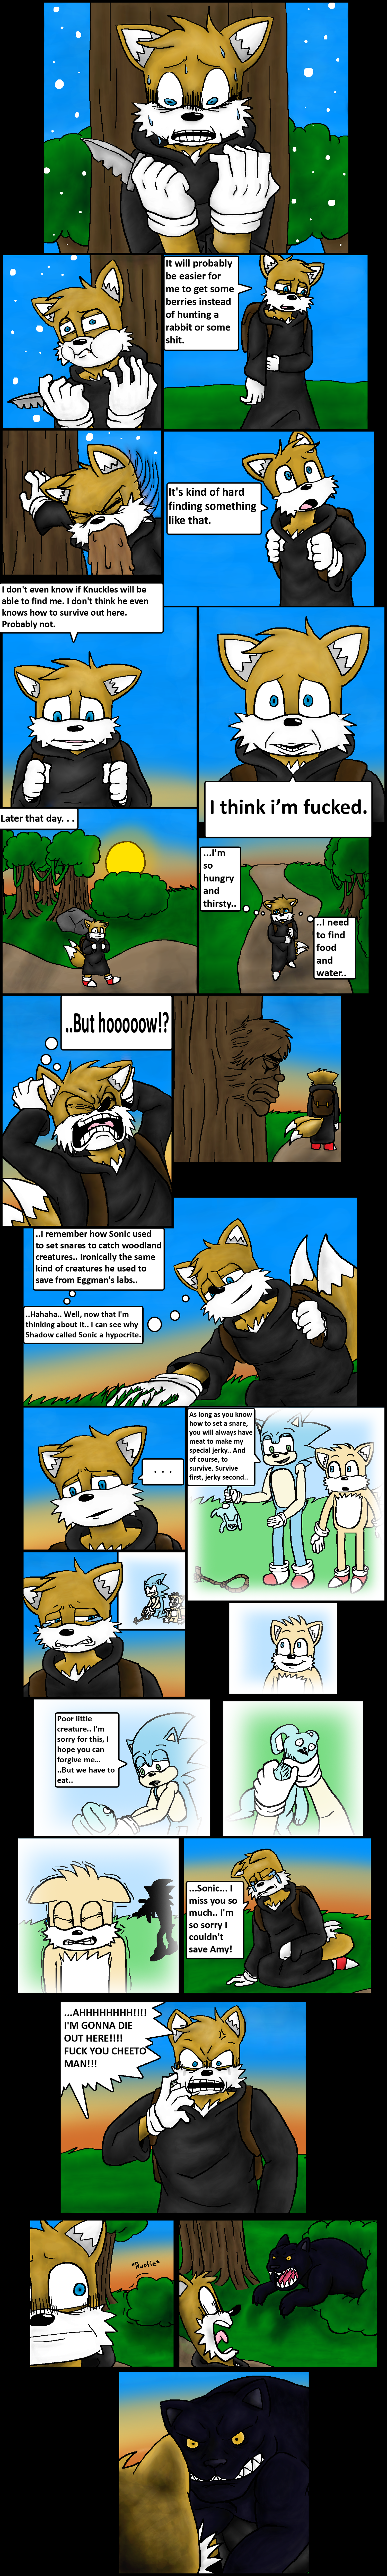 ch26/pg27.png. If you're seeing this, enable images. If you have them enabled, email commodorian@tailsgetstrolled.org with a detailed description of how you got here. (Screenshots help!)